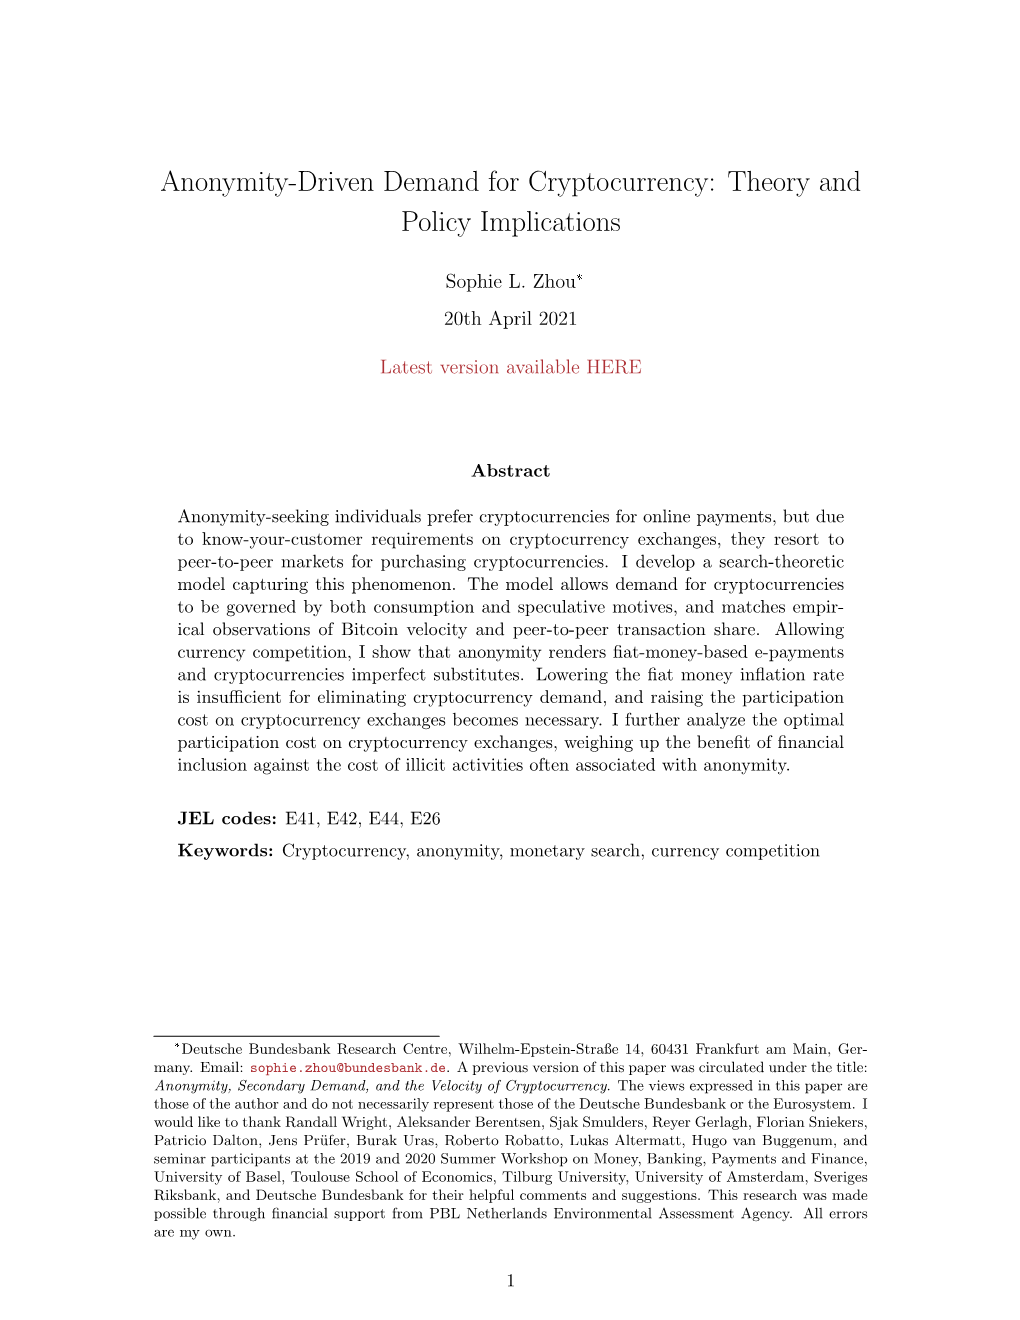 Anonymity-Driven Demand for Cryptocurrency: Theory and Policy Implications